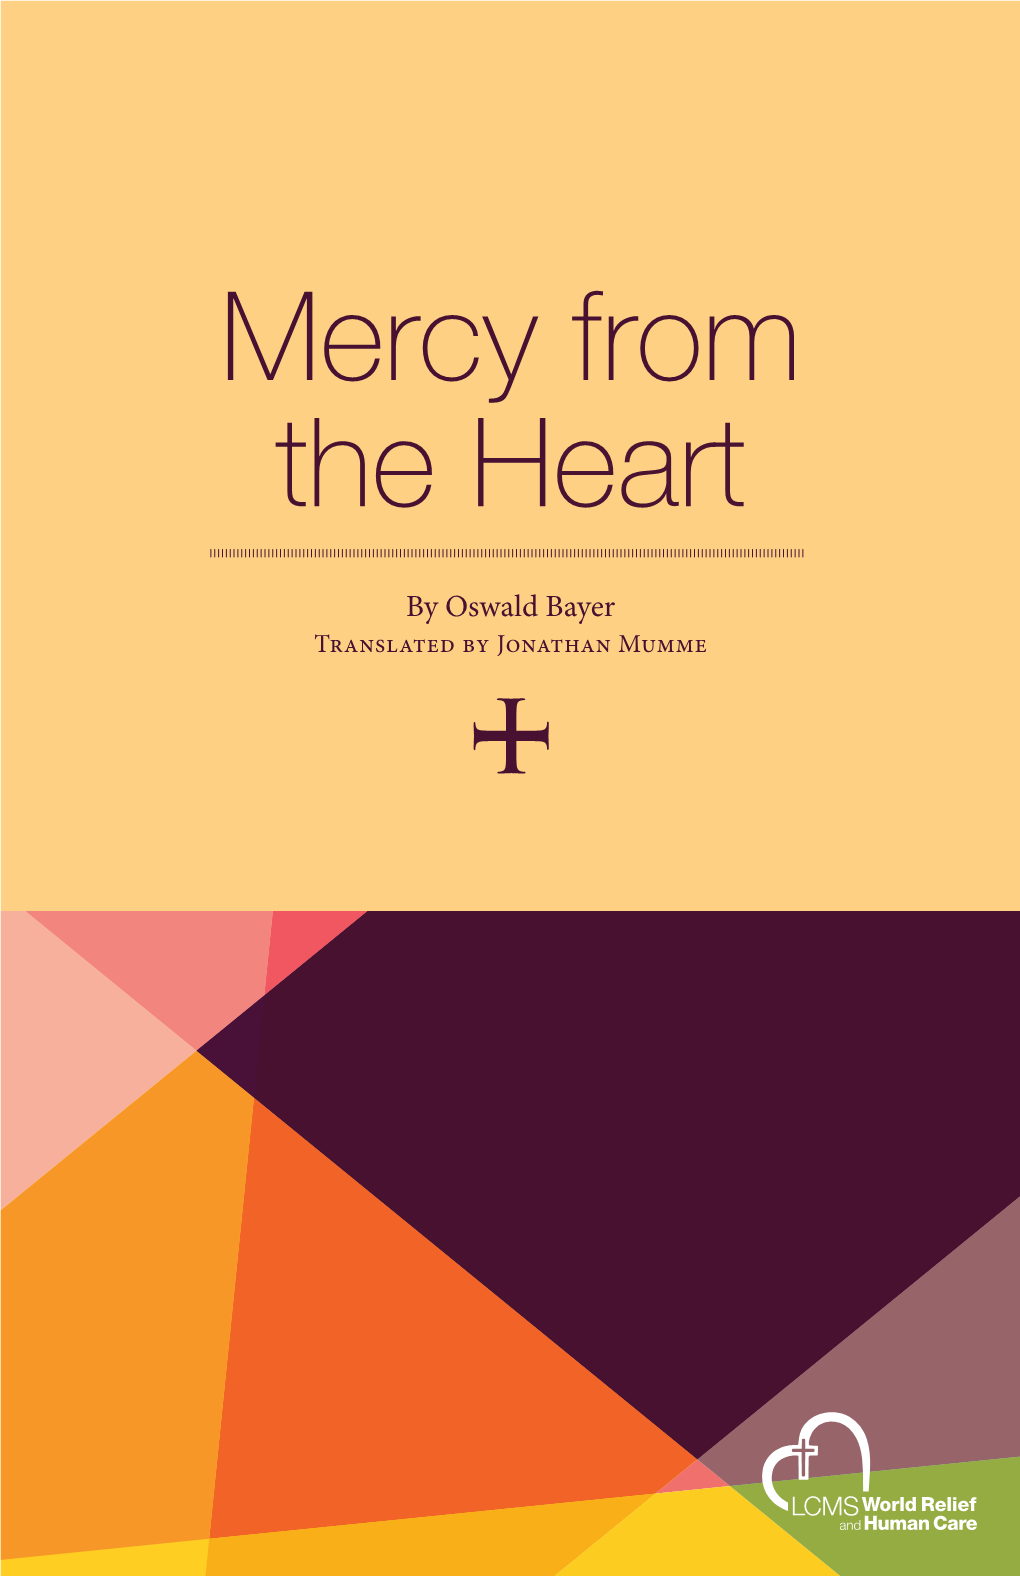 LCMS World Relief and Human Care, Mercy from the Heart by Oswald